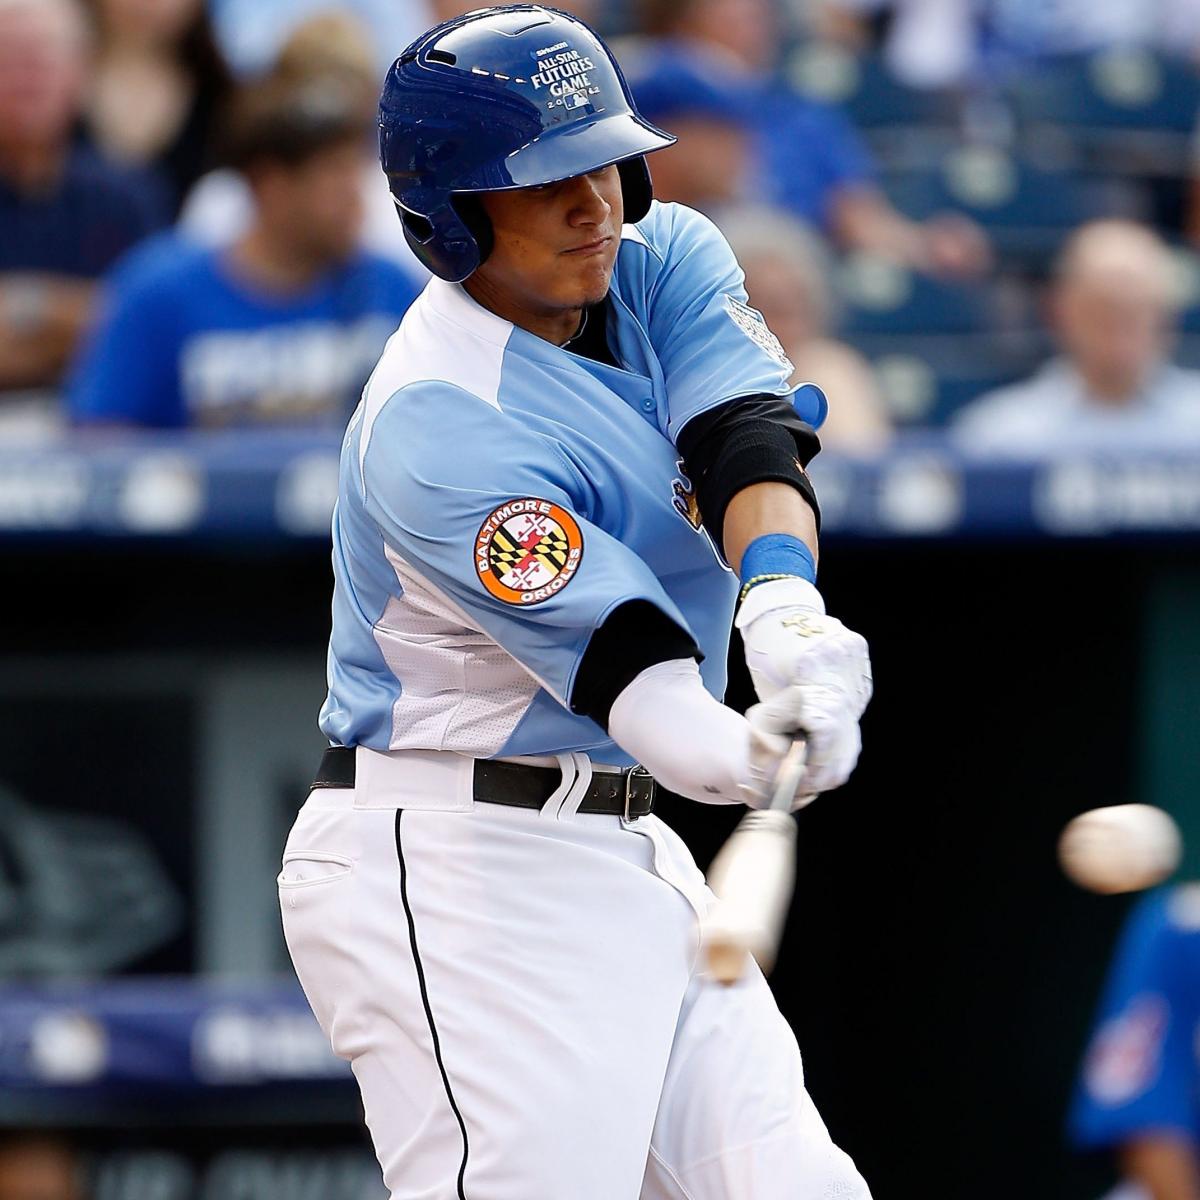 MLB Prospects Hottest Hitting Prospects at Every Minor League Level